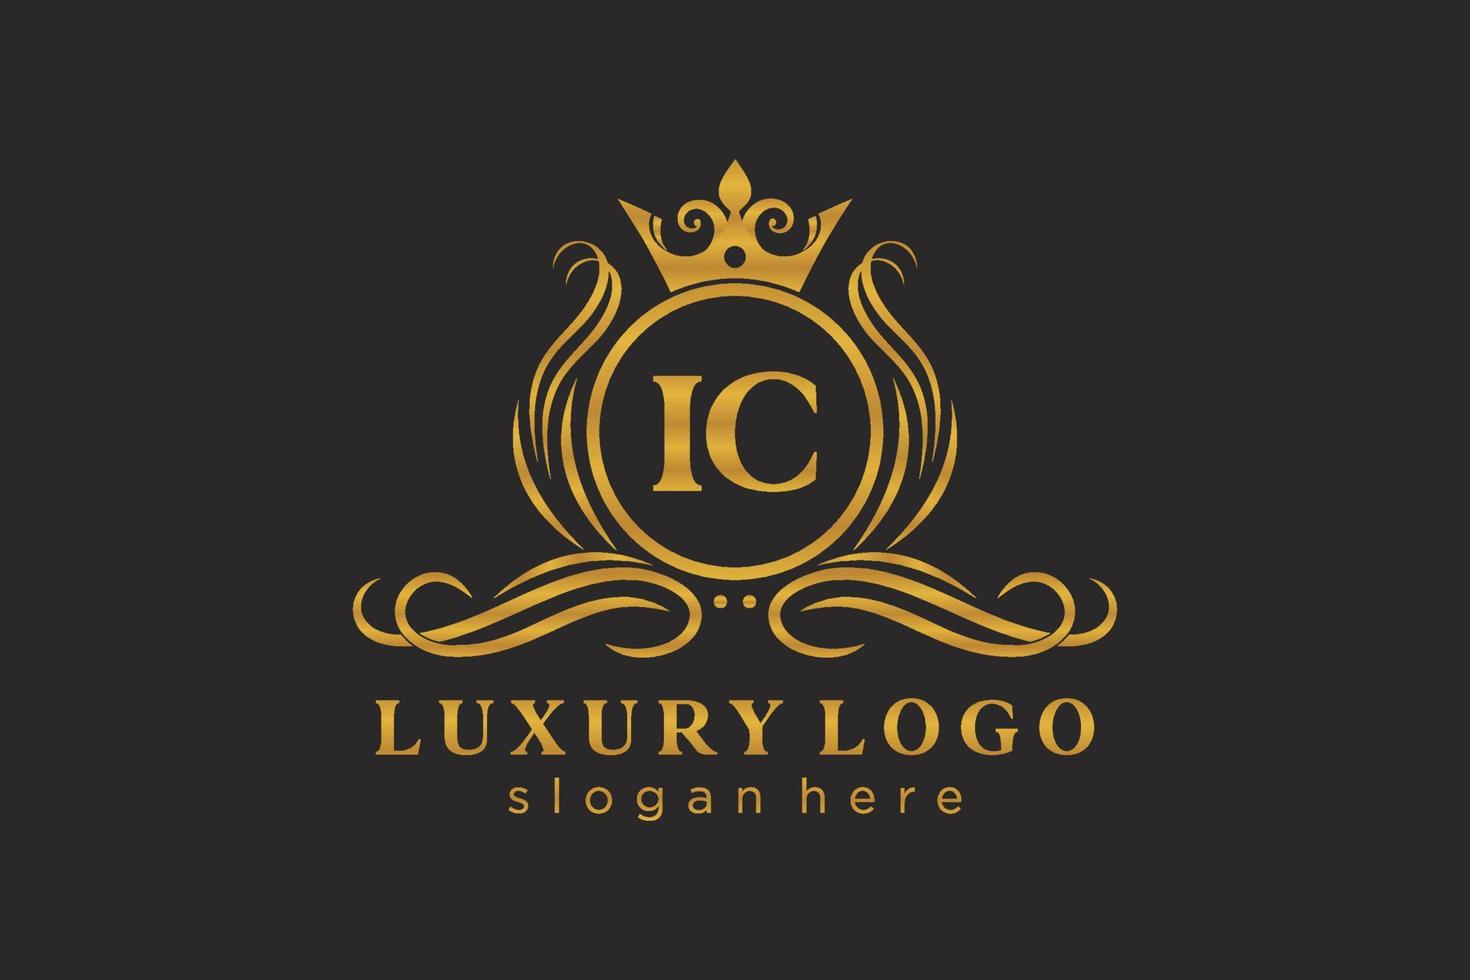 Initial IC Letter Royal Luxury Logo template in vector art for Restaurant, Royalty, Boutique, Cafe, Hotel, Heraldic, Jewelry, Fashion and other vector illustration.